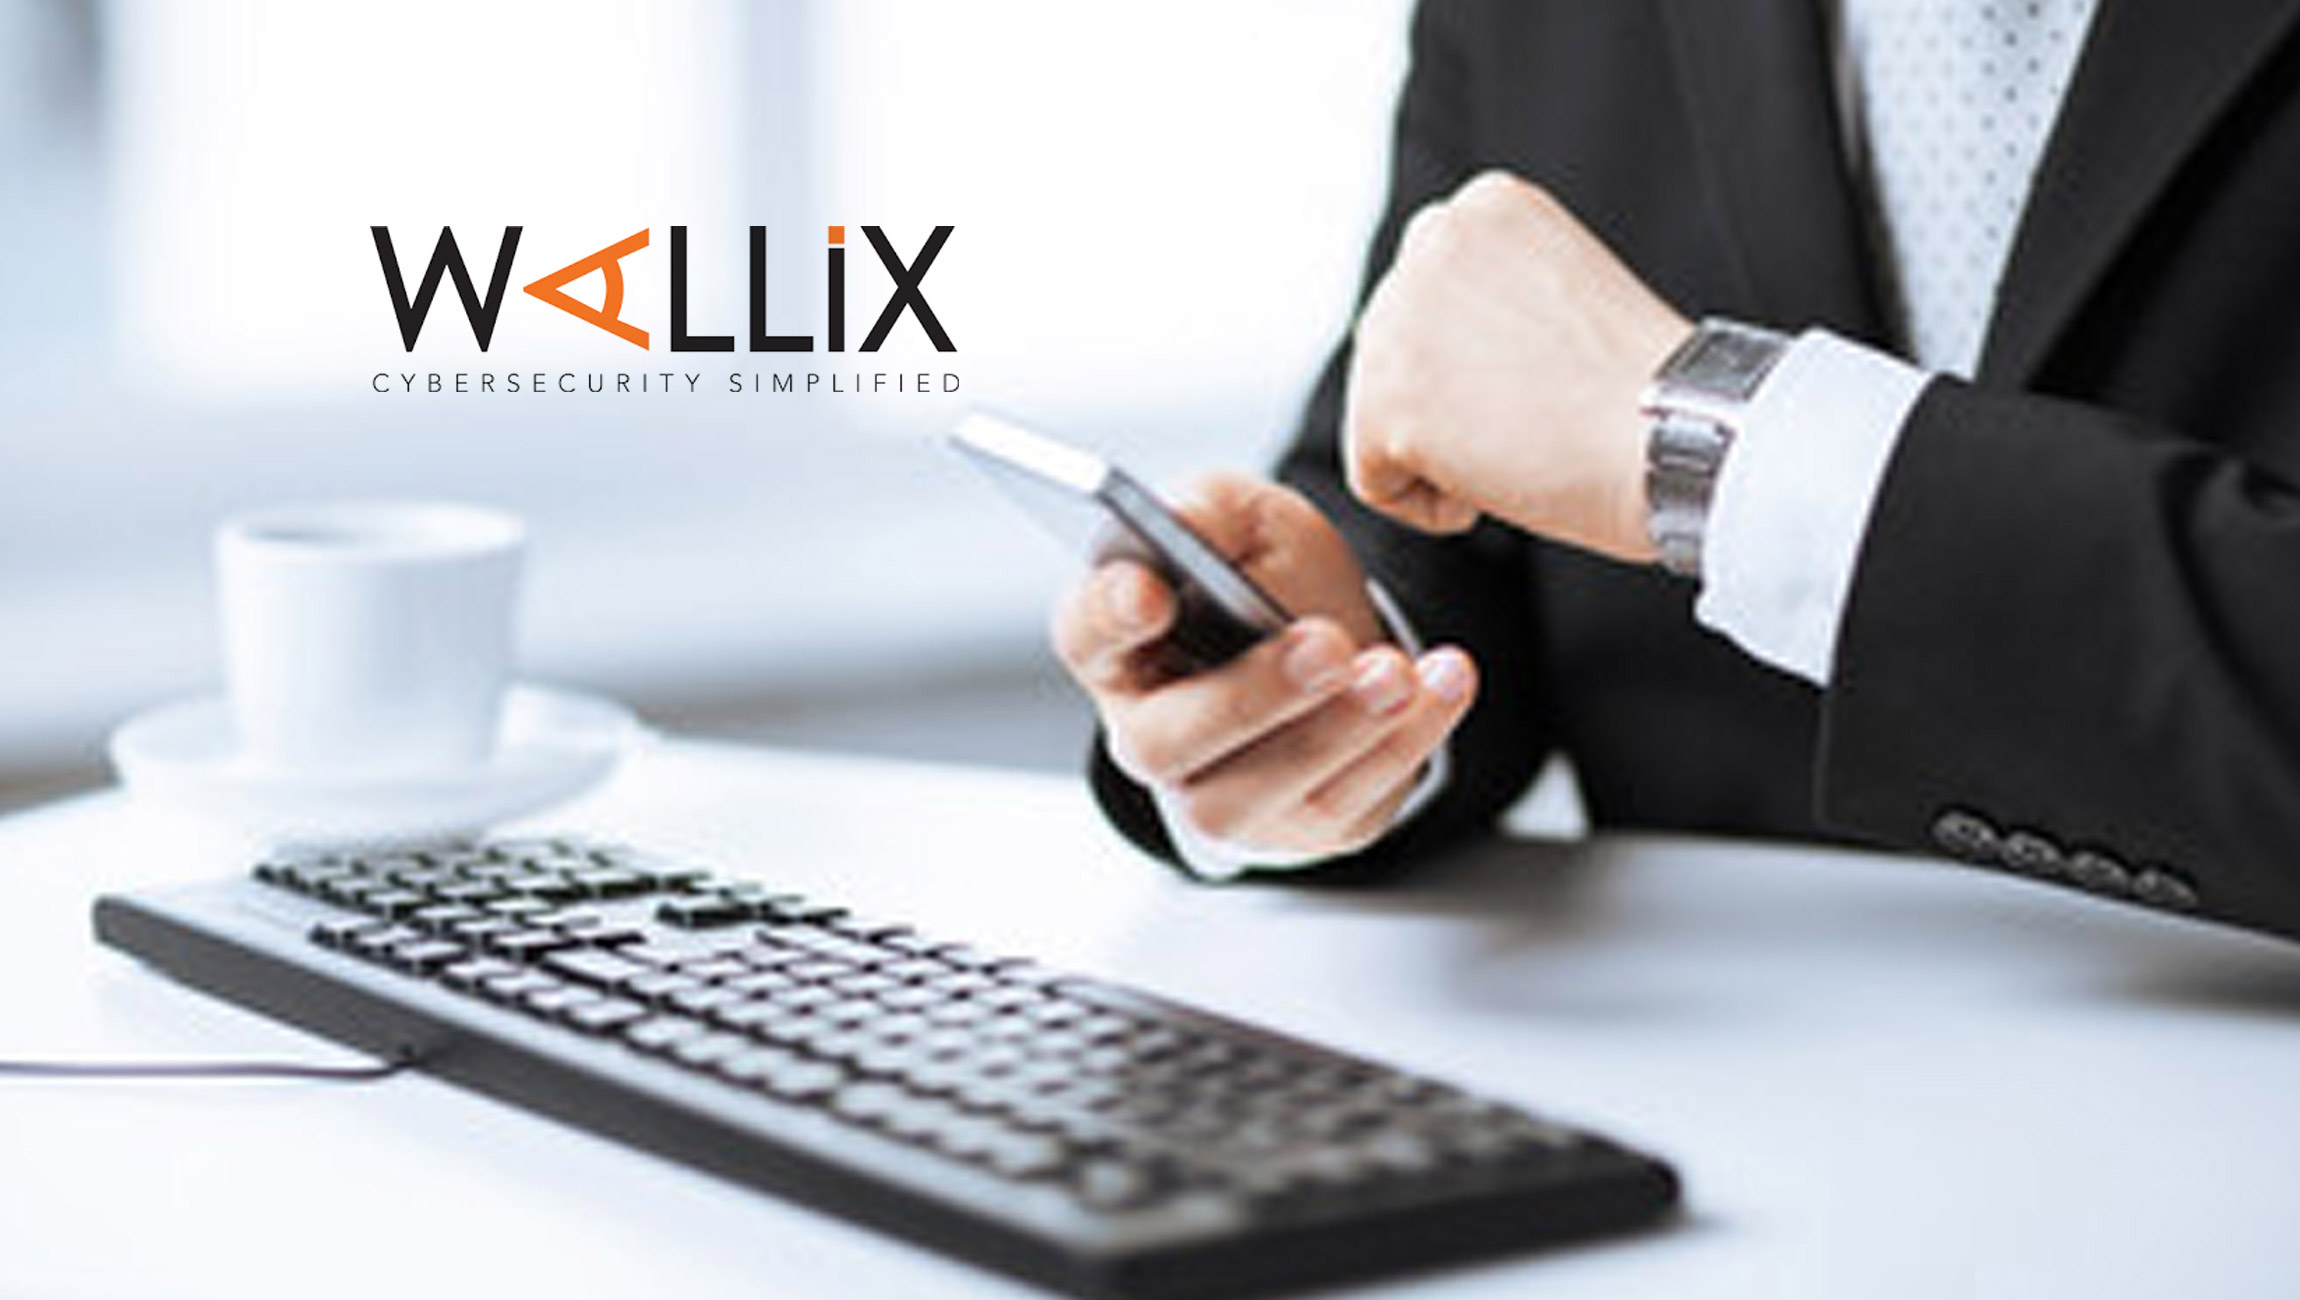 WALLIX Recognized by Frost & Sullivan for Providing Superior Privileged Access Management Technologies to Its Customers